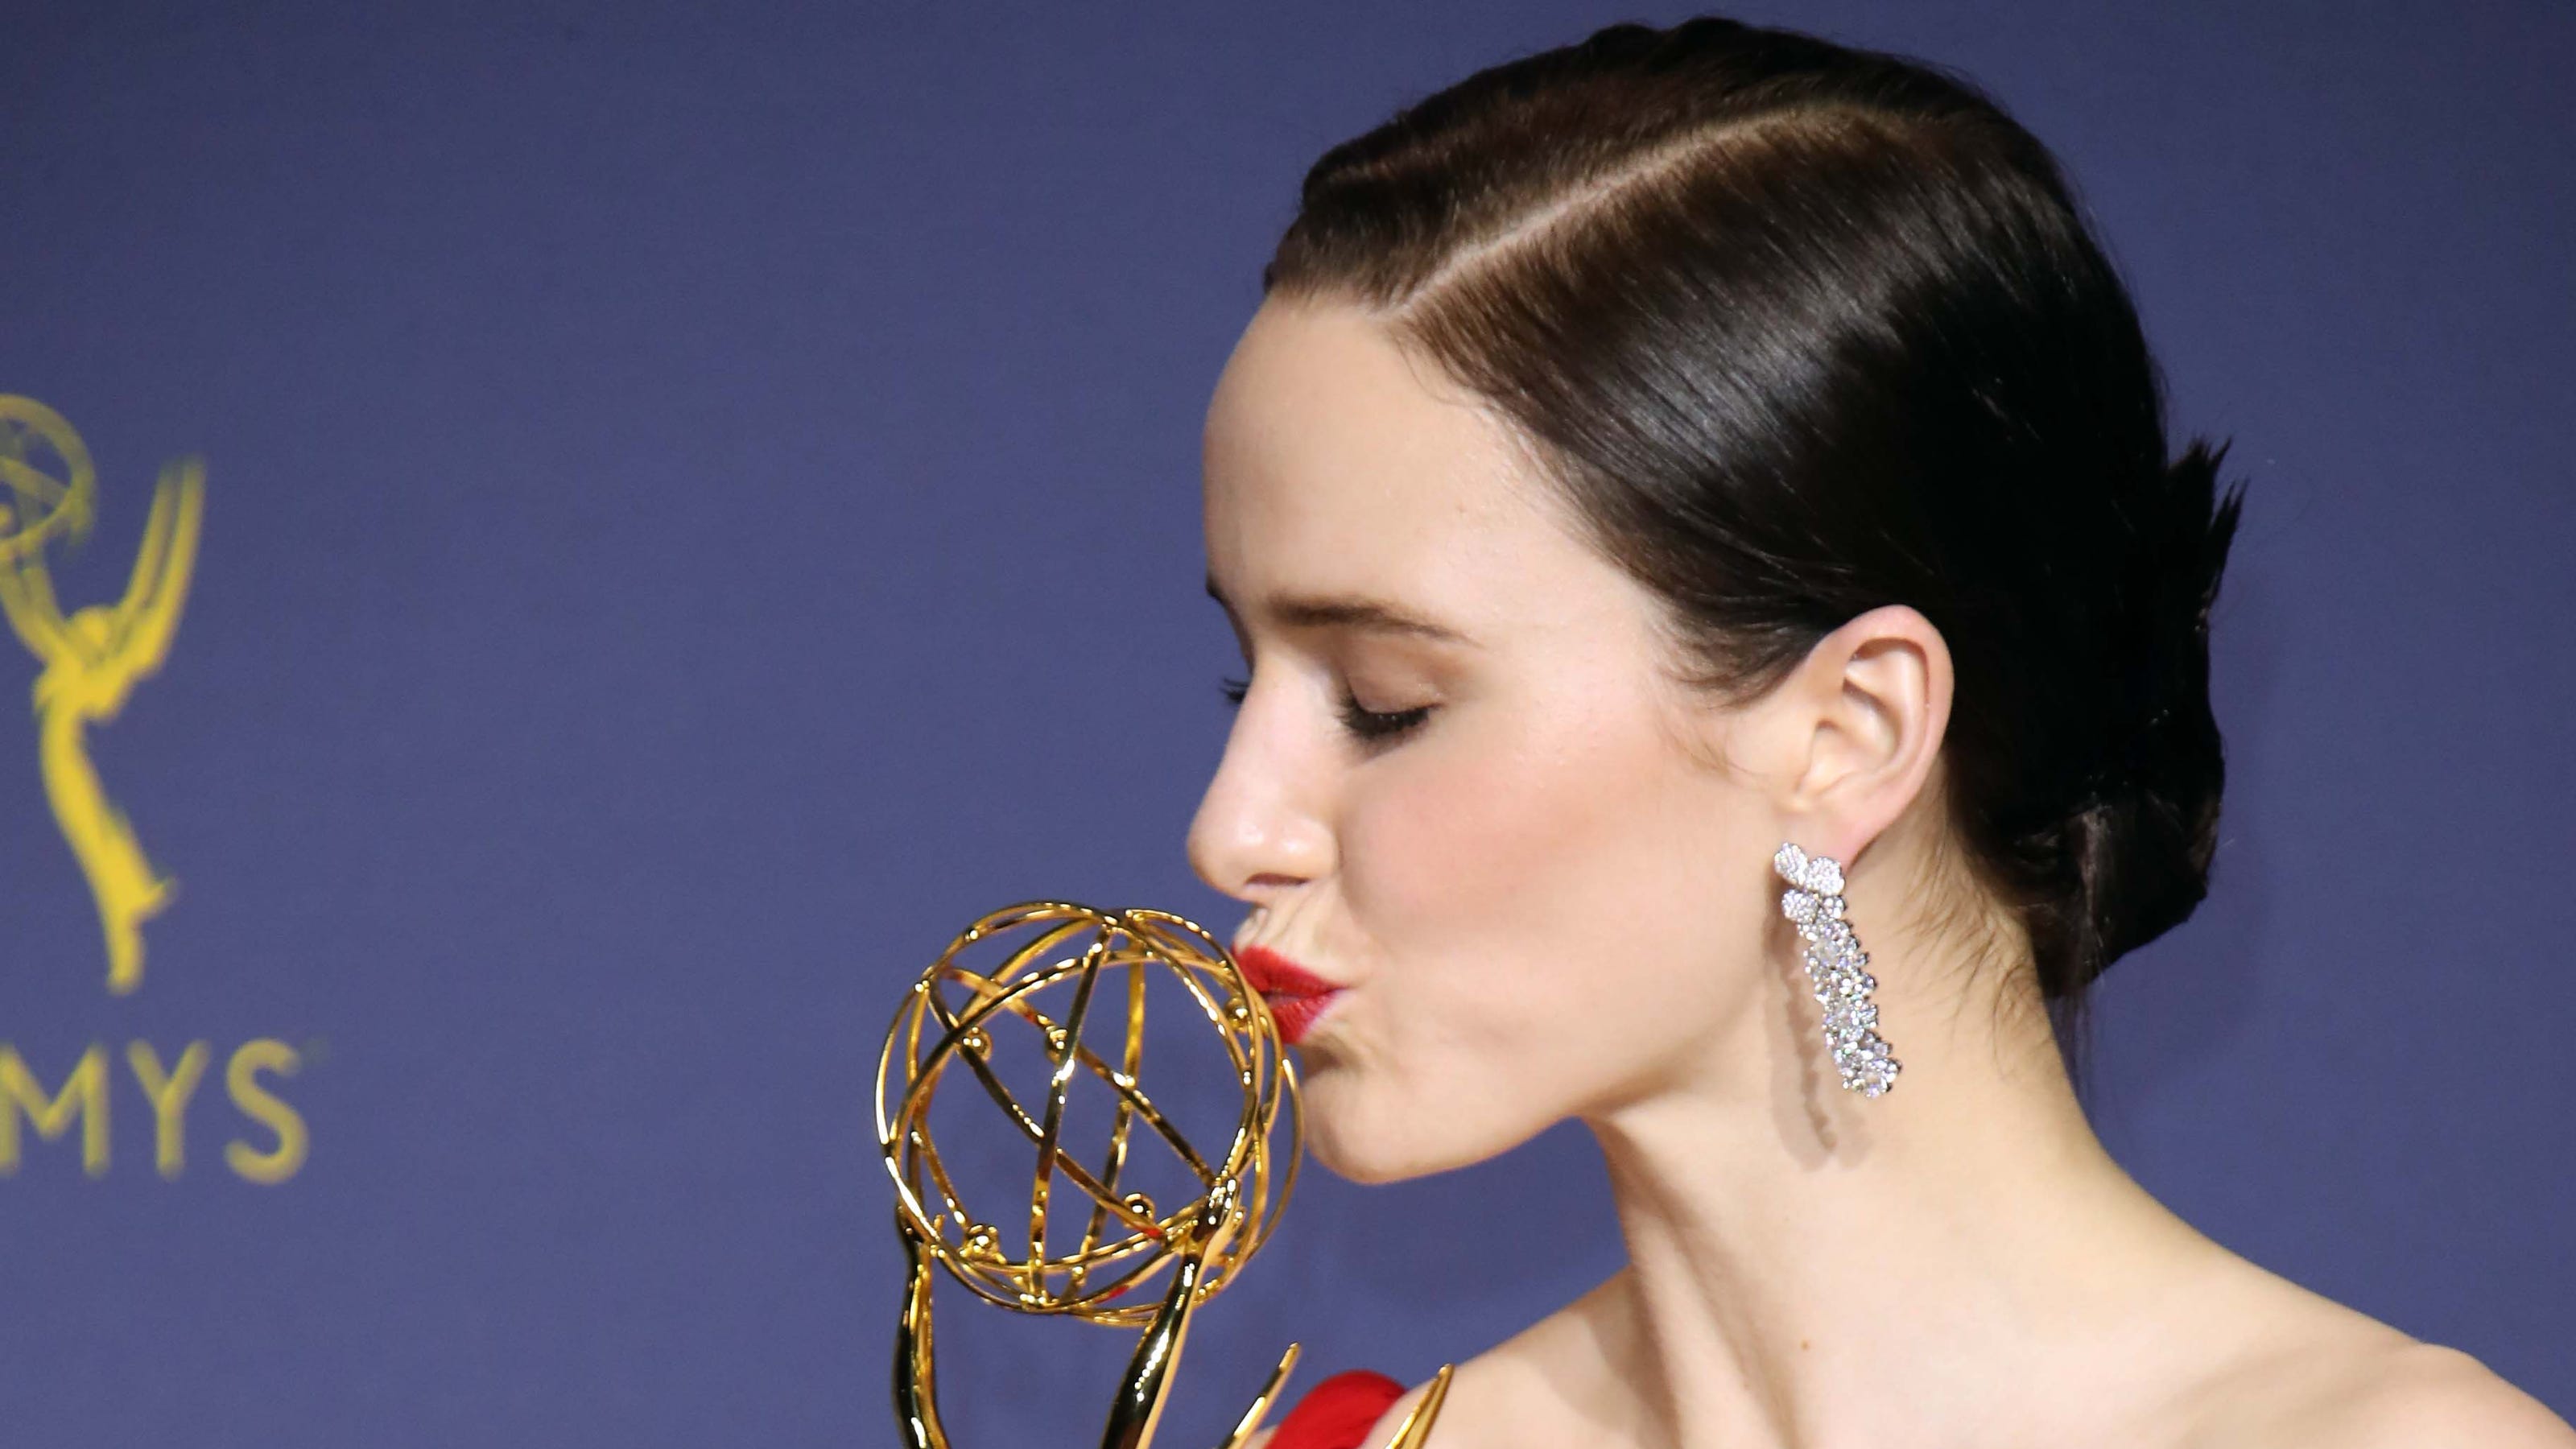 Emmys 2018: 'Game of Thrones' wins best drama, 'Marvelous Mrs. Maisel' takes best comedy